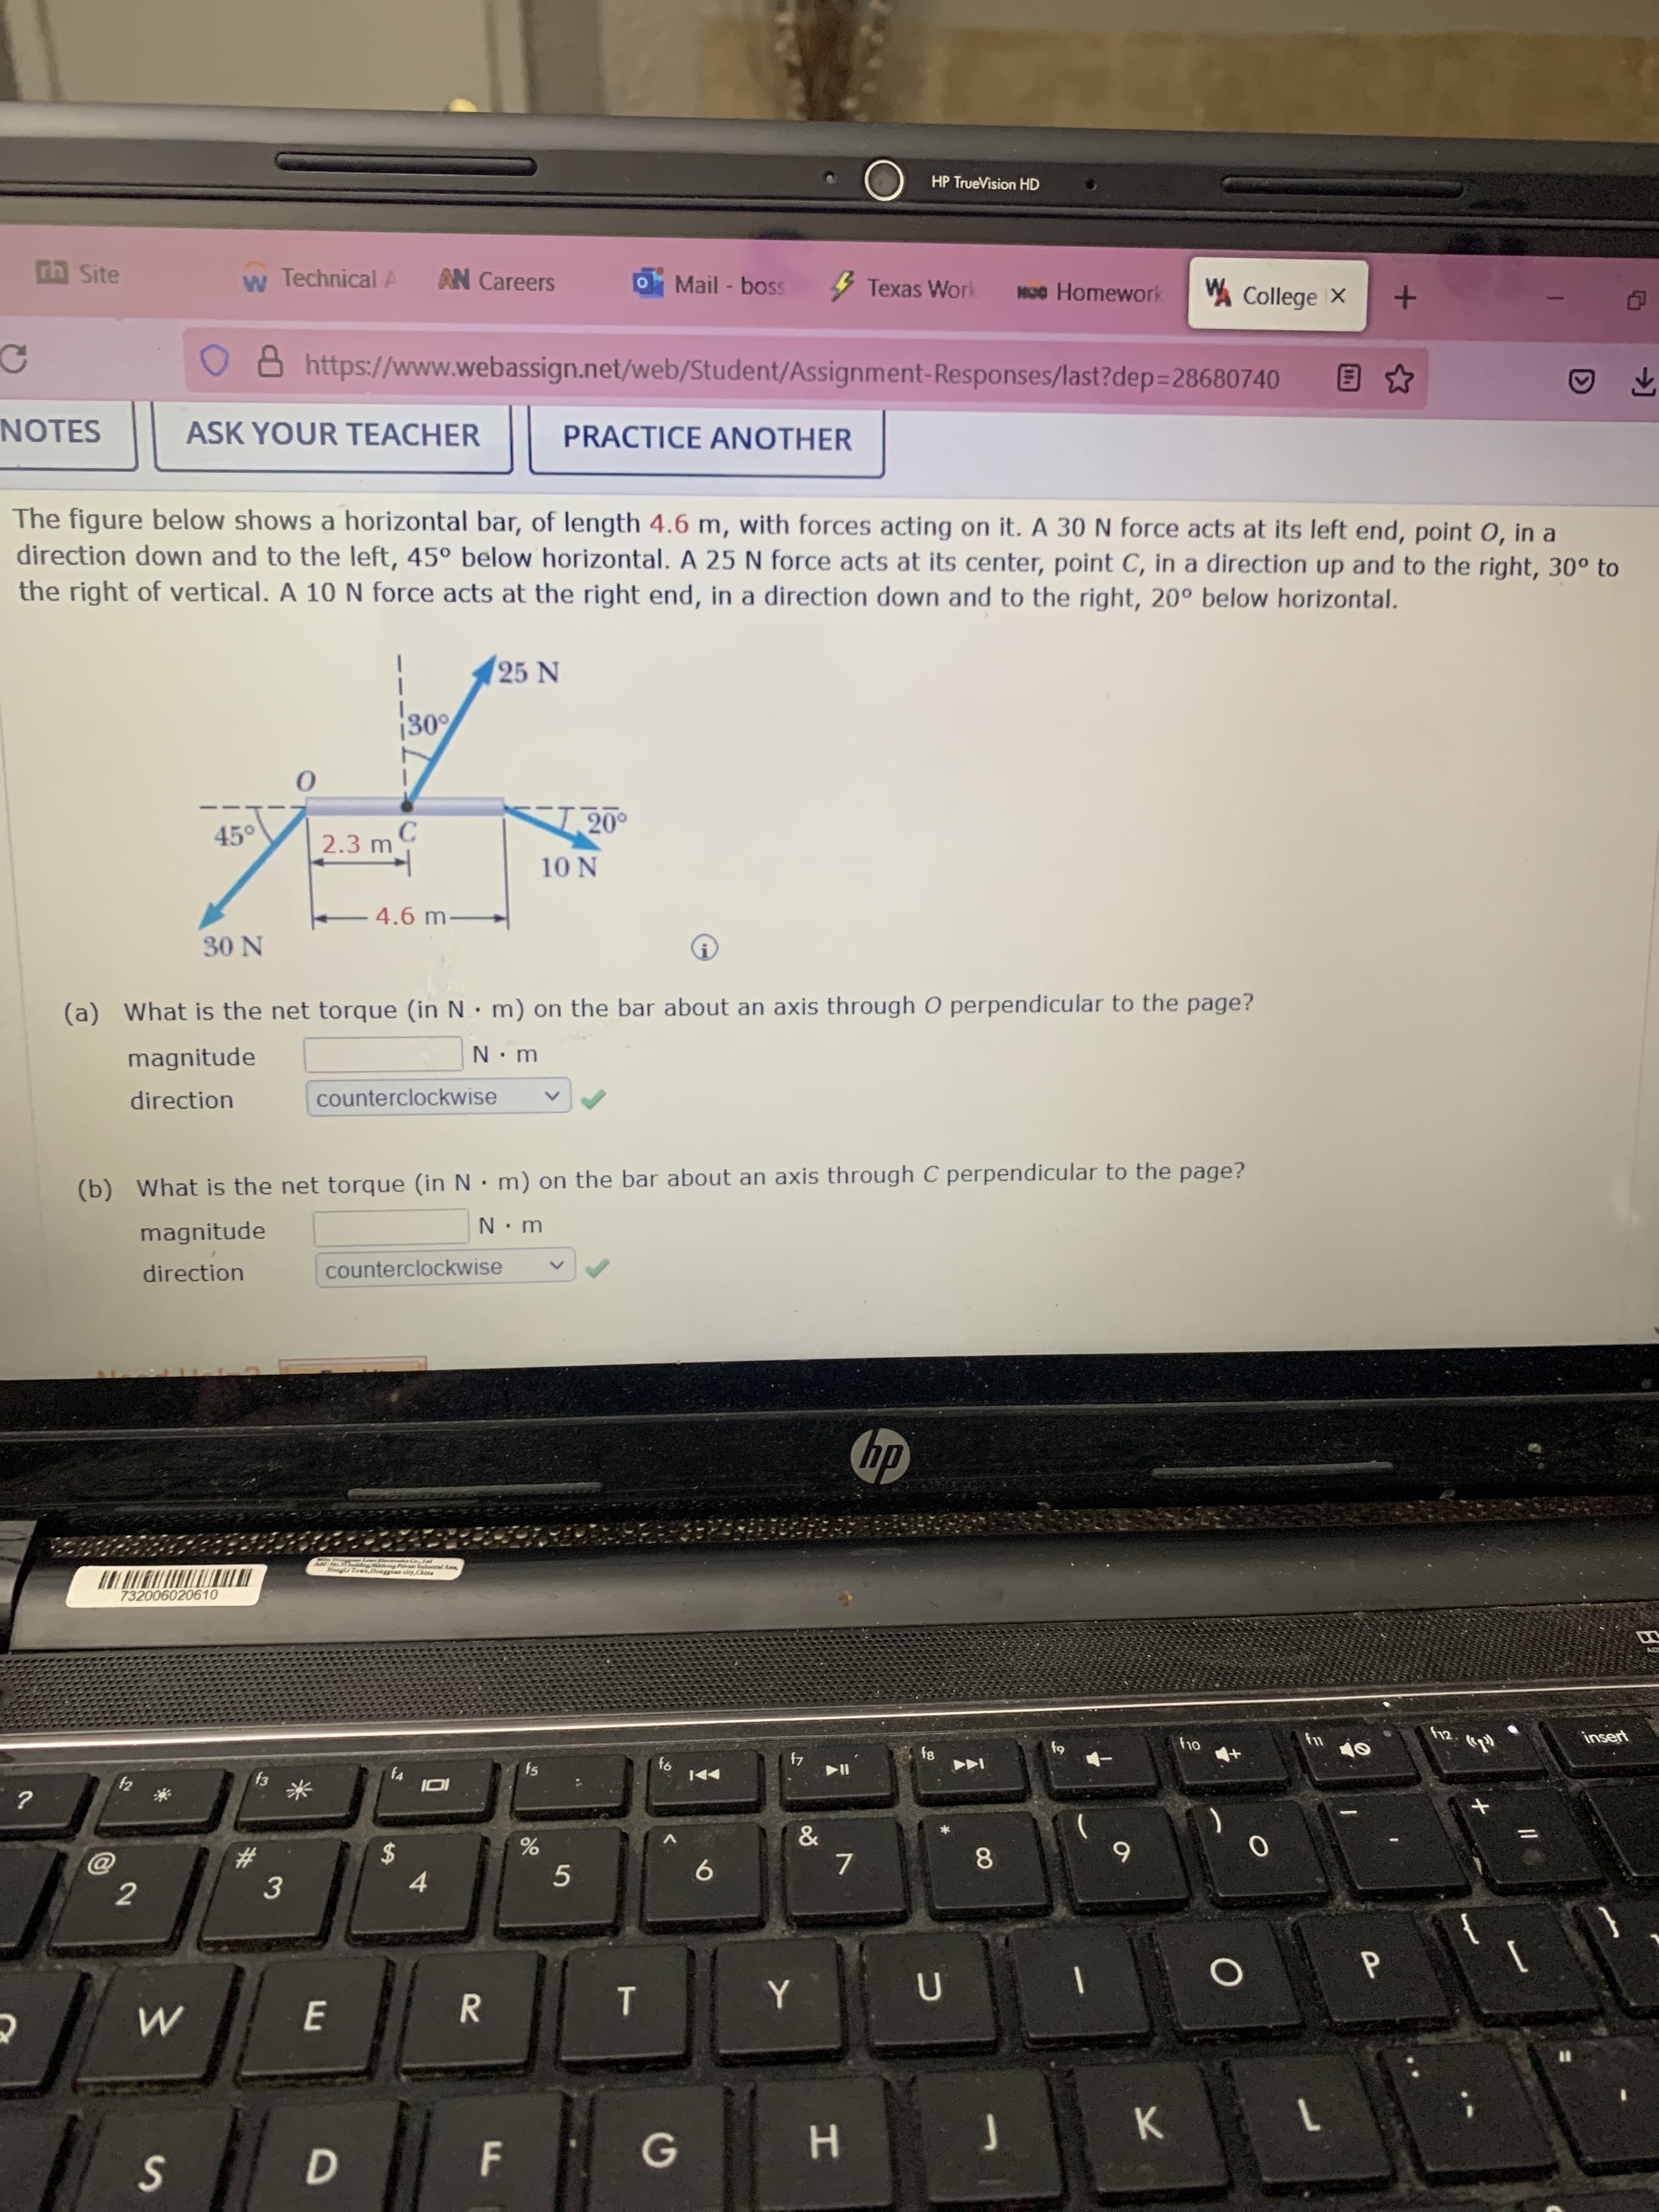 P.
F.
DI
HP TrueVision HD
nn Site
w Technical A
AN Careers
OMail-boss
5 Texas Work
VA College X
O 8 https://www.webassign.net/web/Student/Assignment-Responses/last?dep3D28680740
NOTES
ASK YOUR TEACHER
PRACTICE ANOTHER
The figure below shows a horizontal bar, of length 4.6 m, with forces acting on it. A 30 N force acts at its left end, point O, in a
direction down and to the left, 45° below horizontal. A 25 N force acts at its center, point C, in a direction up and to the right, 30° to
the right of vertical. A 10 N force acts at the right end, in a direction down and to the right, 20° below horizontal.
25 N
30'
45°
C.
2.3 m
10 N
4.6 m-
N 0.
(a) What is the net torque (in N• m) on the bar about an axis through O perpendicular to the page?
magnitude
direction
counterclockwise
(b) What is the net torque (in N • m) on the bar about an axis through C perpendicular to the page?
magnitude
direction
counterclockwise
dy
AddNo ding ong Pre lodurrial As,
Hangli Town Donggn city,China
732006020610
insert
fs
4
米
6.
5
8.
2$
7.
%23
2
9.
3.
4.
{
Y
R
K.
1.
G
H.
